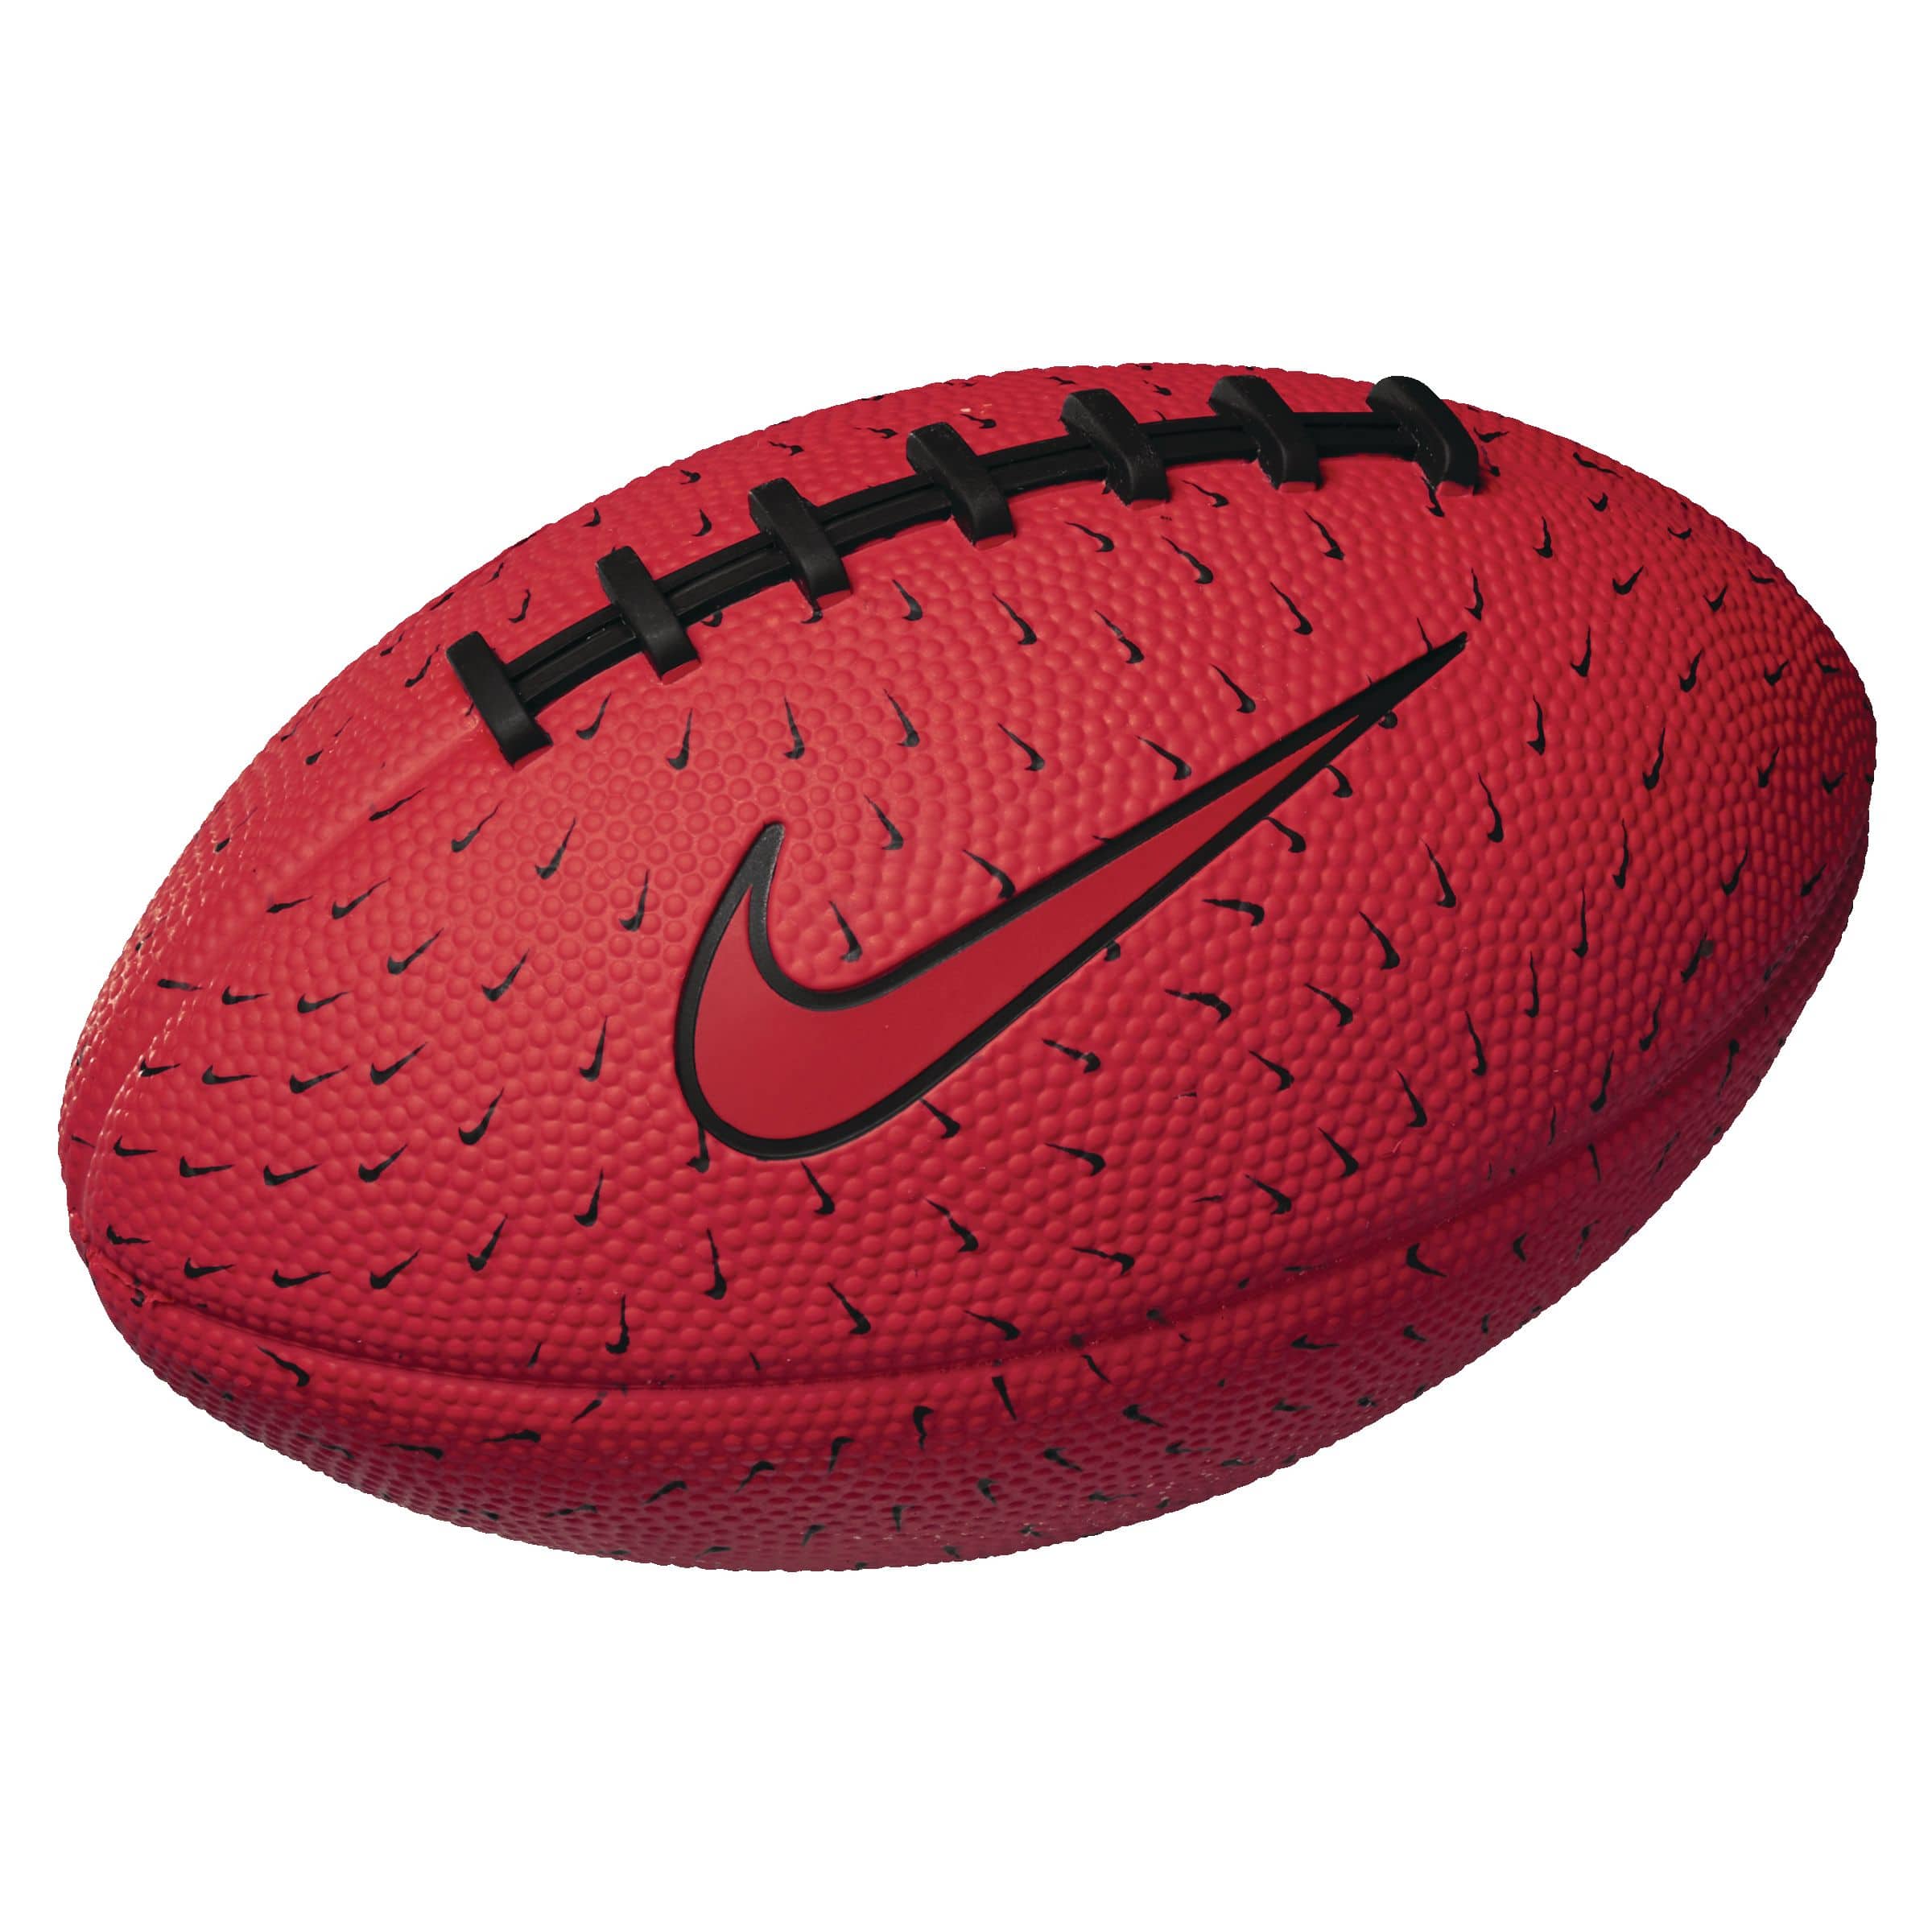 Nike Mini Spin 4.0 Rubber Football, Red, Size 5 | Canadian Tire